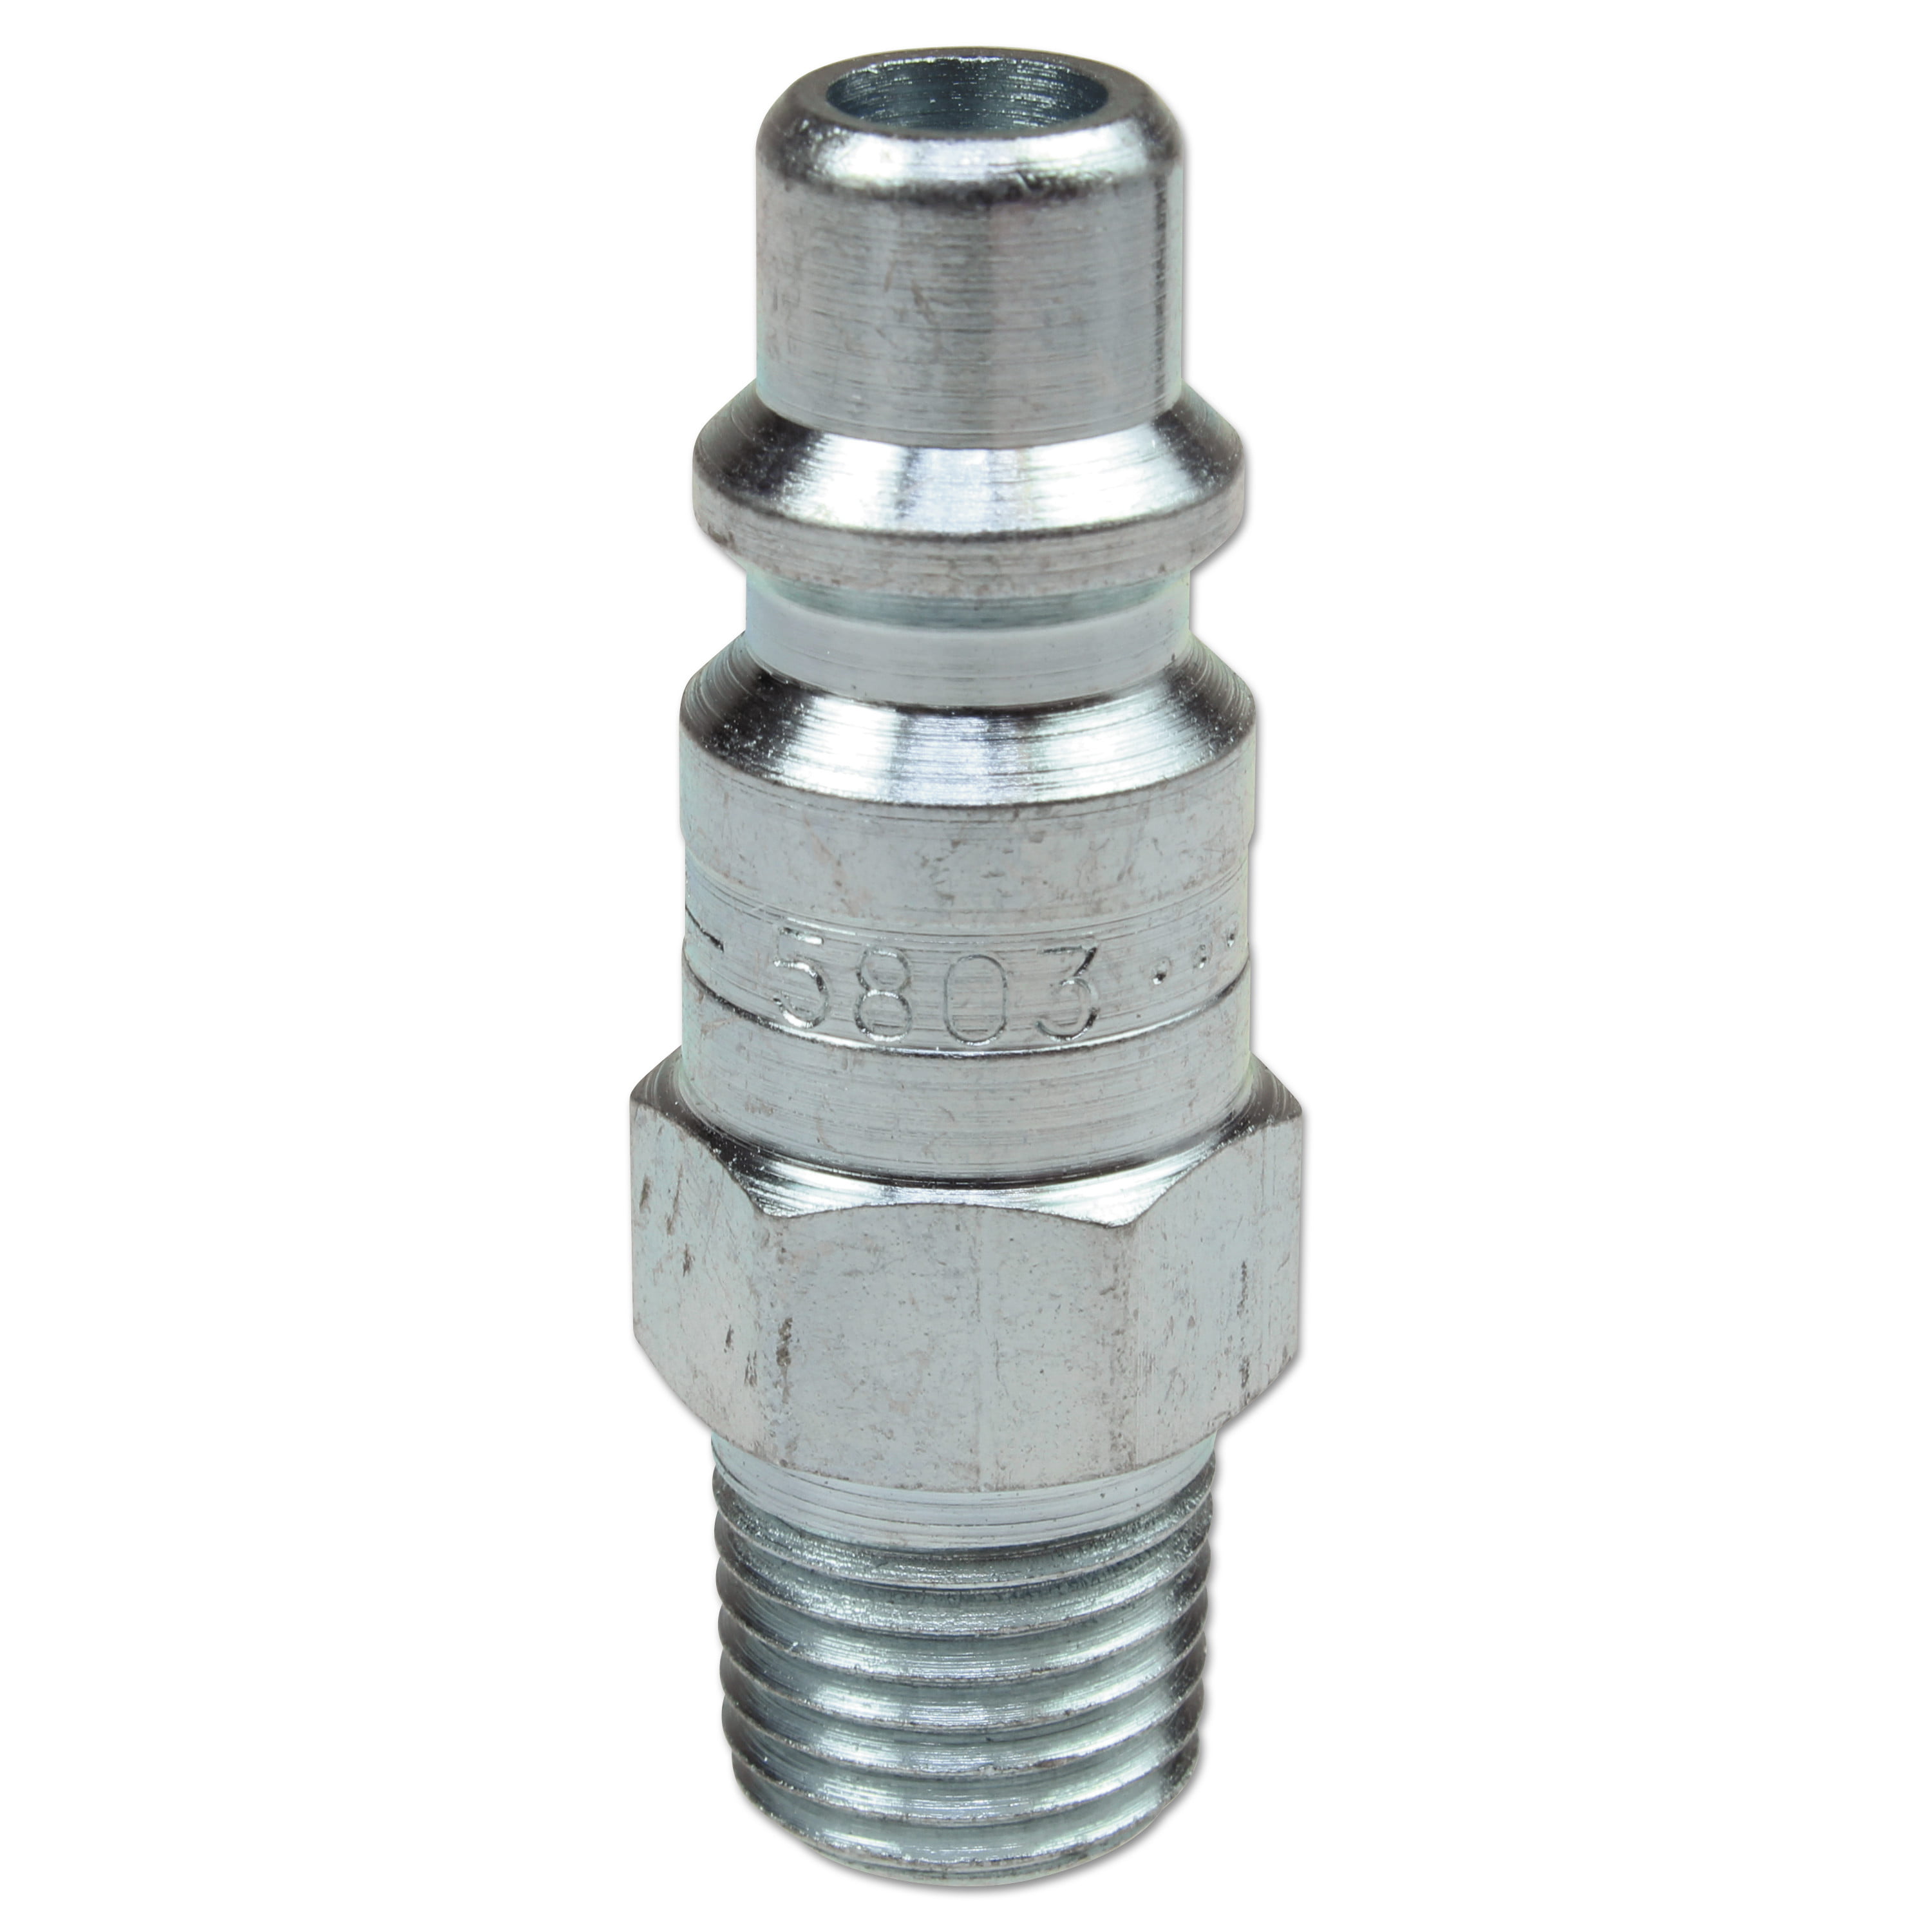 1/4 in Male NPT CoilFemalelow Industrial Interchange Connectors 30 Pack 